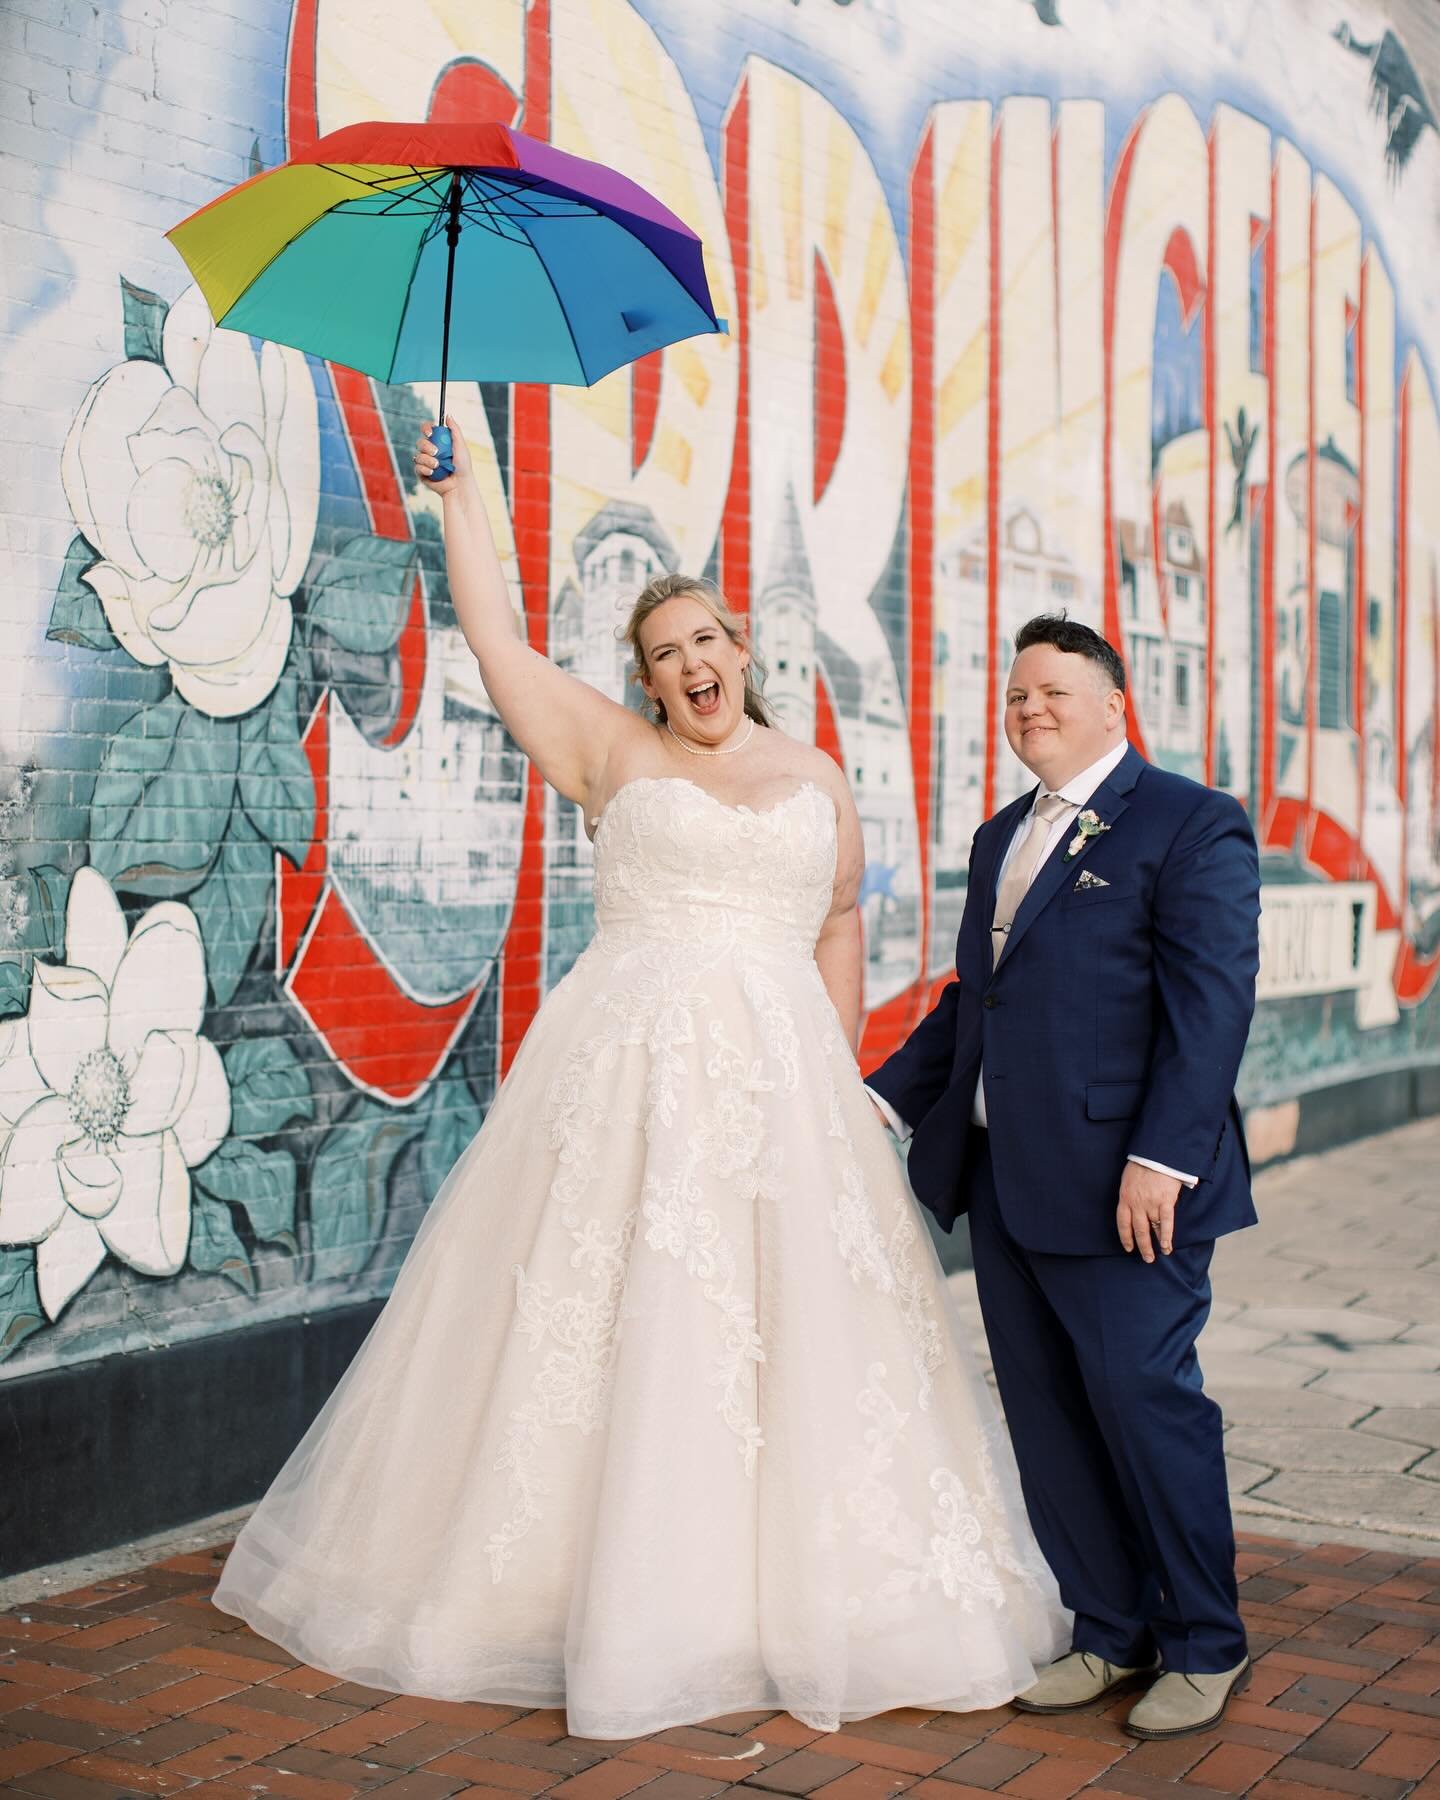 Sara + Lore&rsquo;s wedding anniversary party at @brickandbeamjax 🌈 these two were non-stop smiling all day and night with their family and friends! I just adore the way these two looked at each other for the first time during their first look. Love